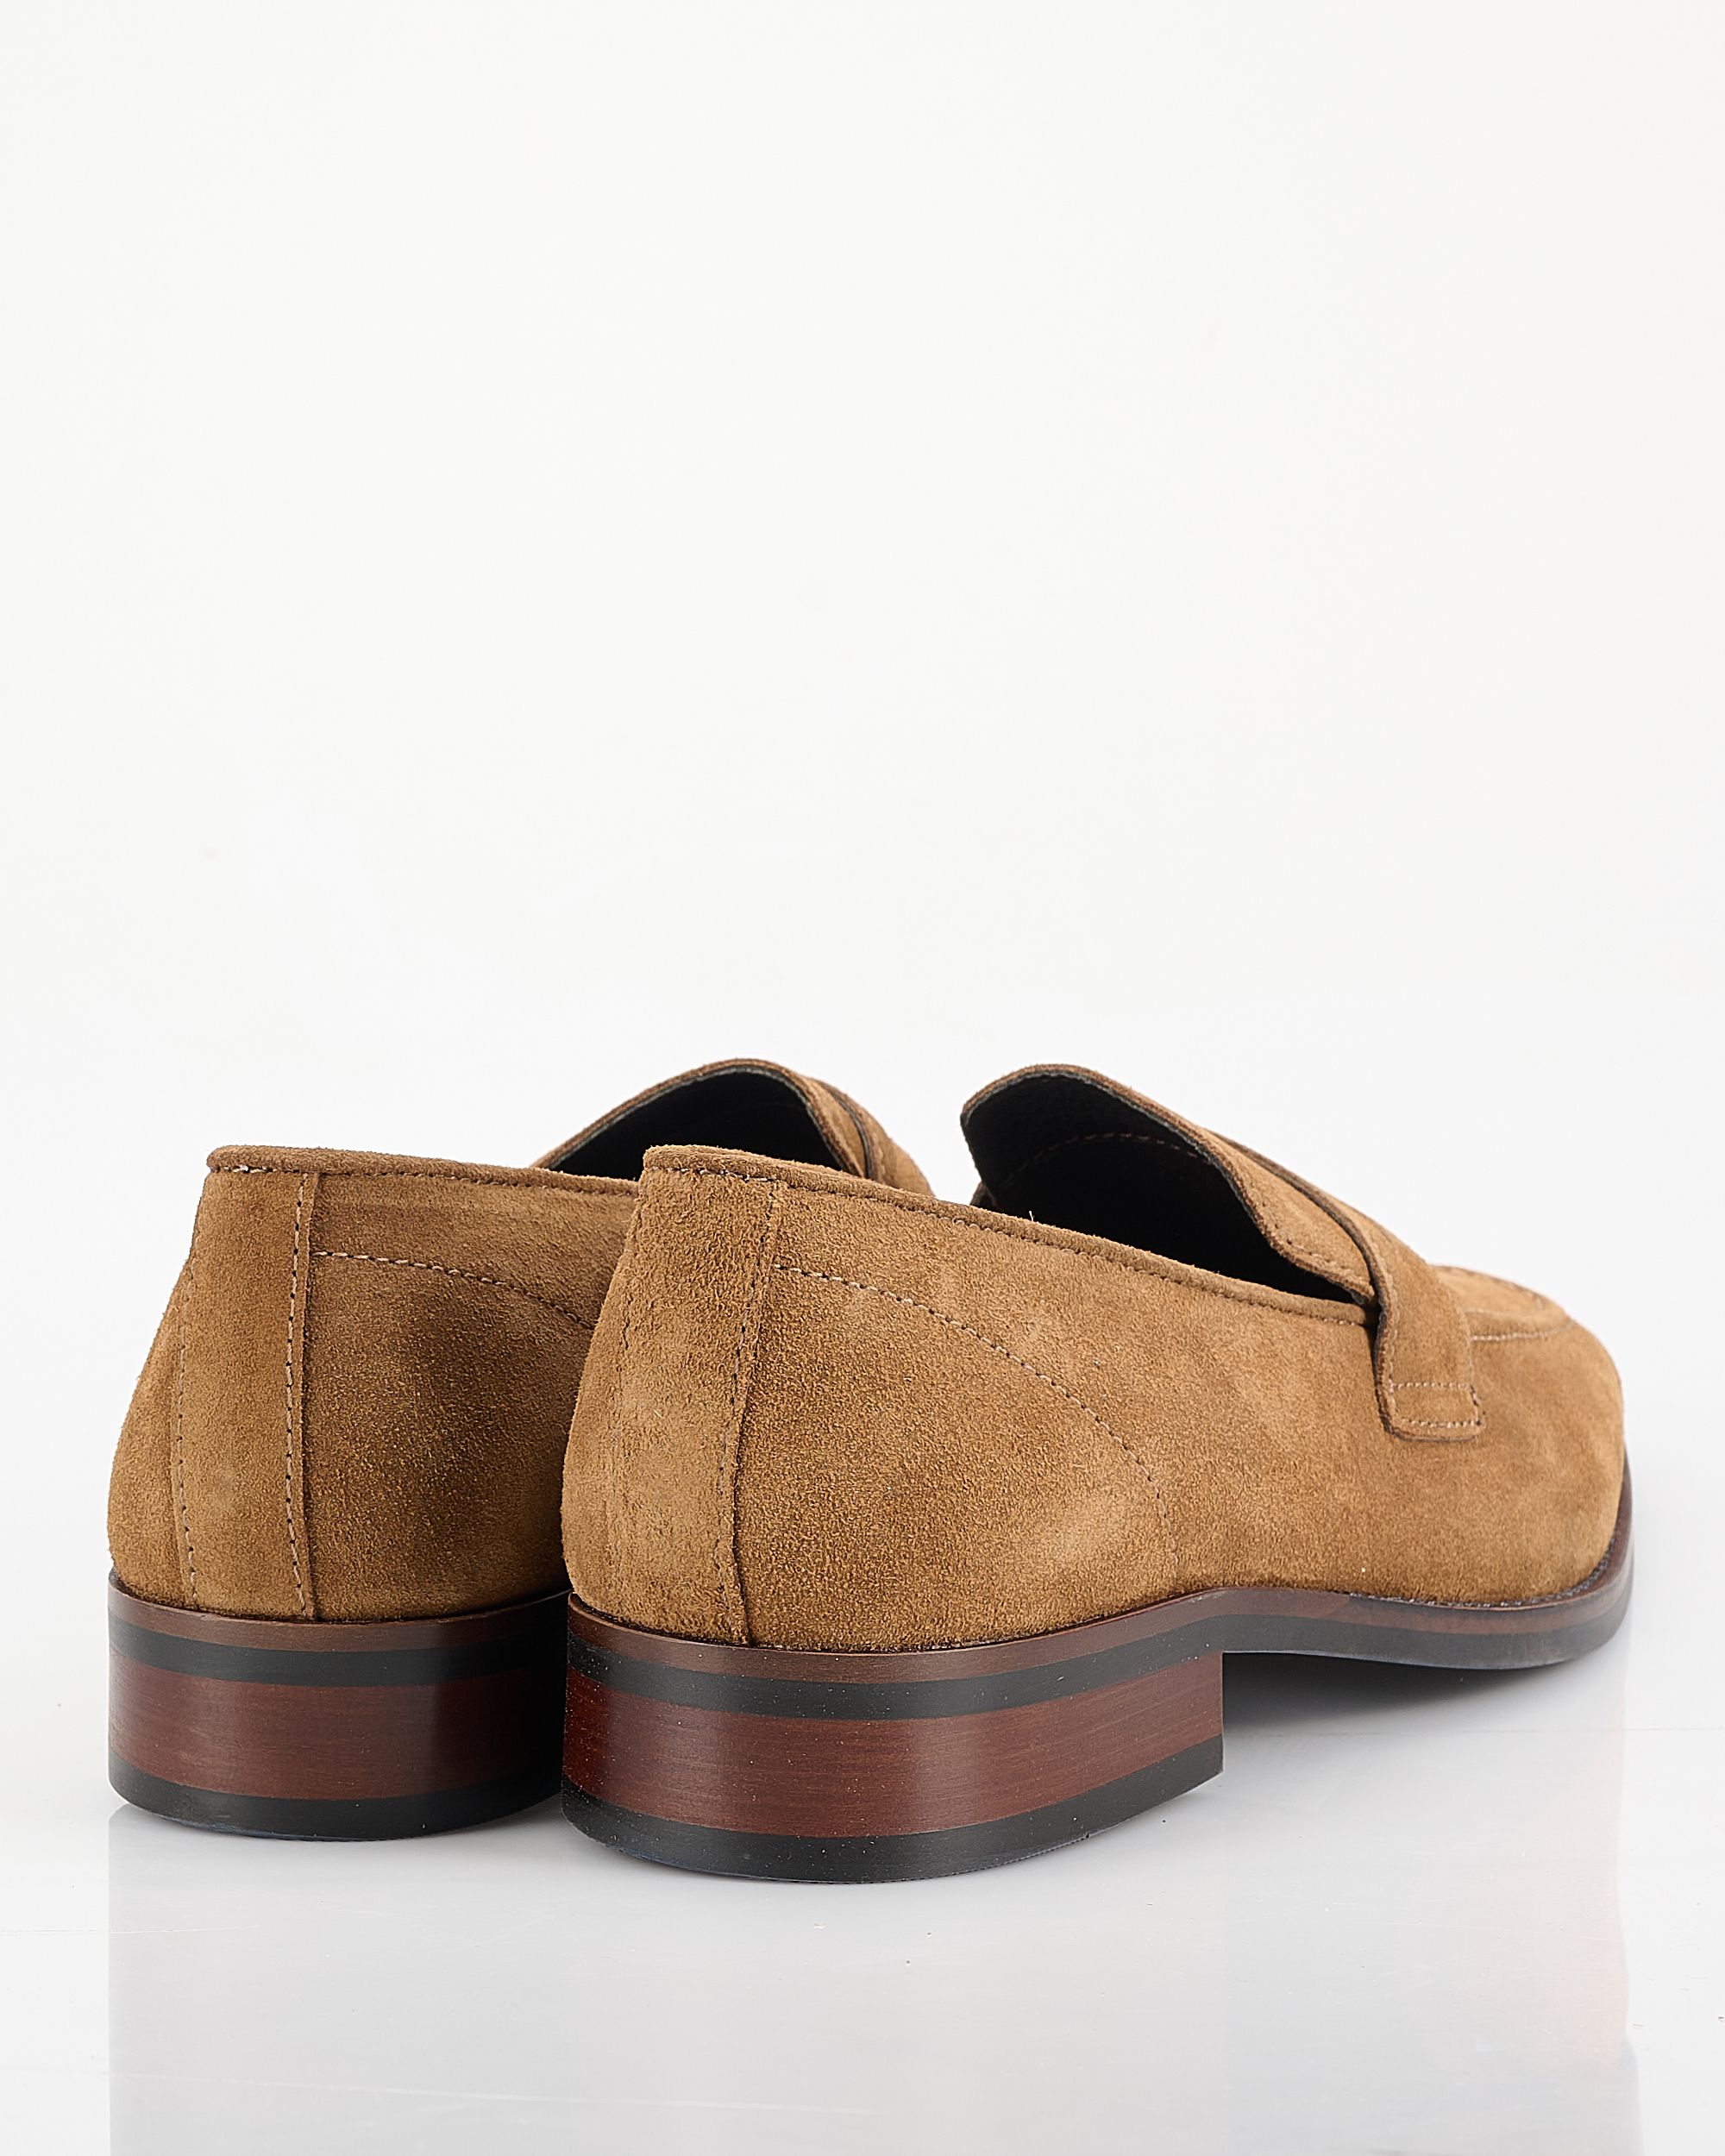 Recall - Loafers Caramel 091870-003-40